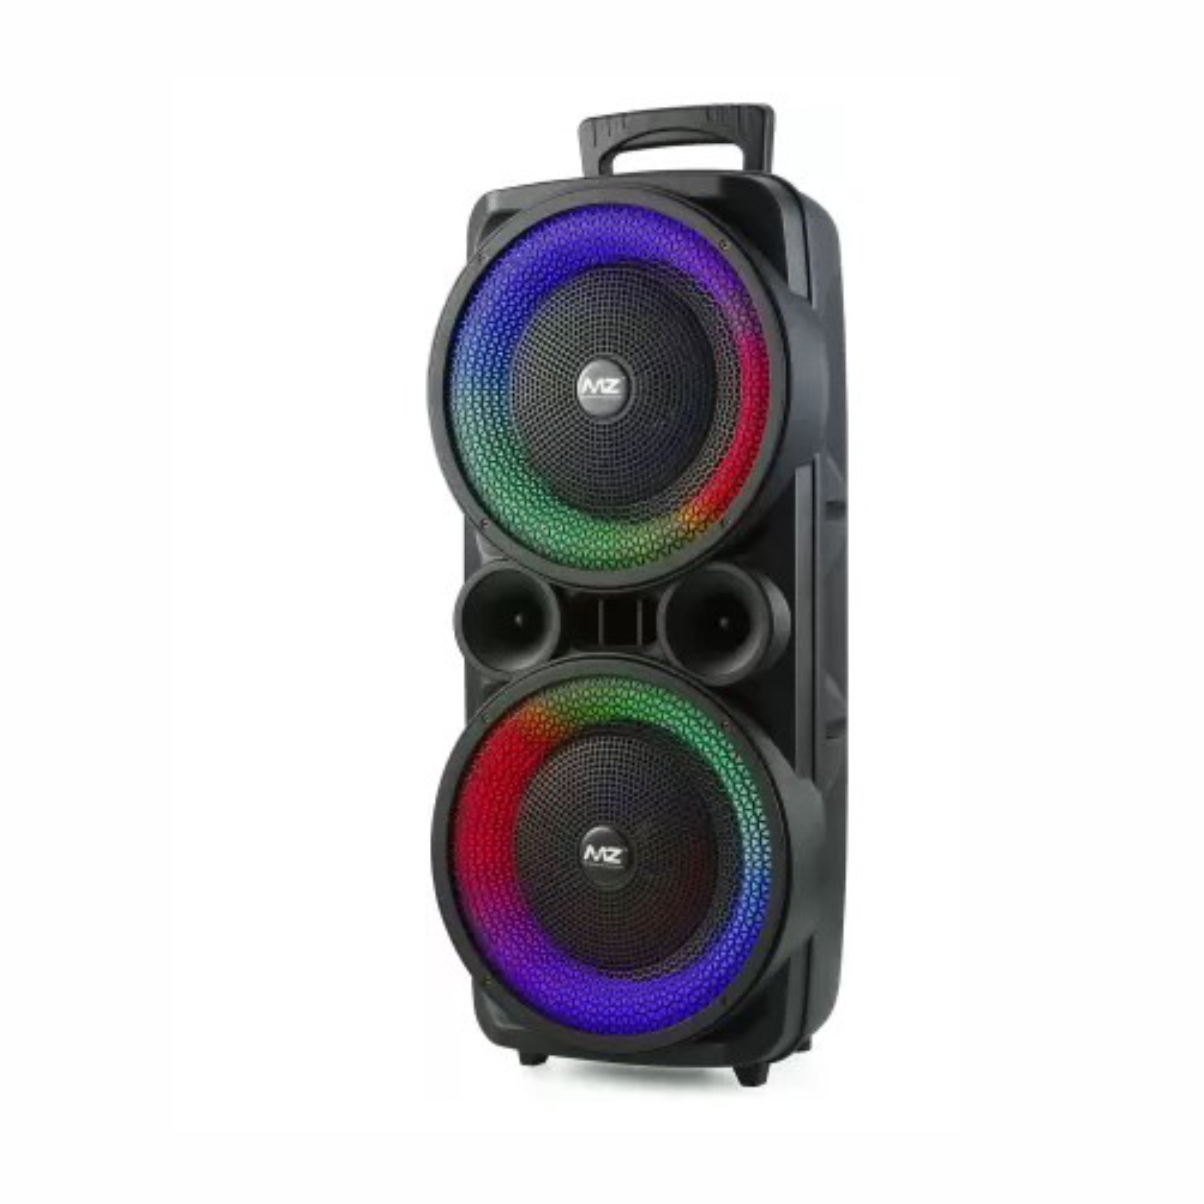 MZ M309 Dynamic Thunder Sound with wireless Mic 8X2 Inch 20 W Bluetooth Speaker (Multicolor, Stereo Channel) (PORTABLE KAROAKE SPEAKER)